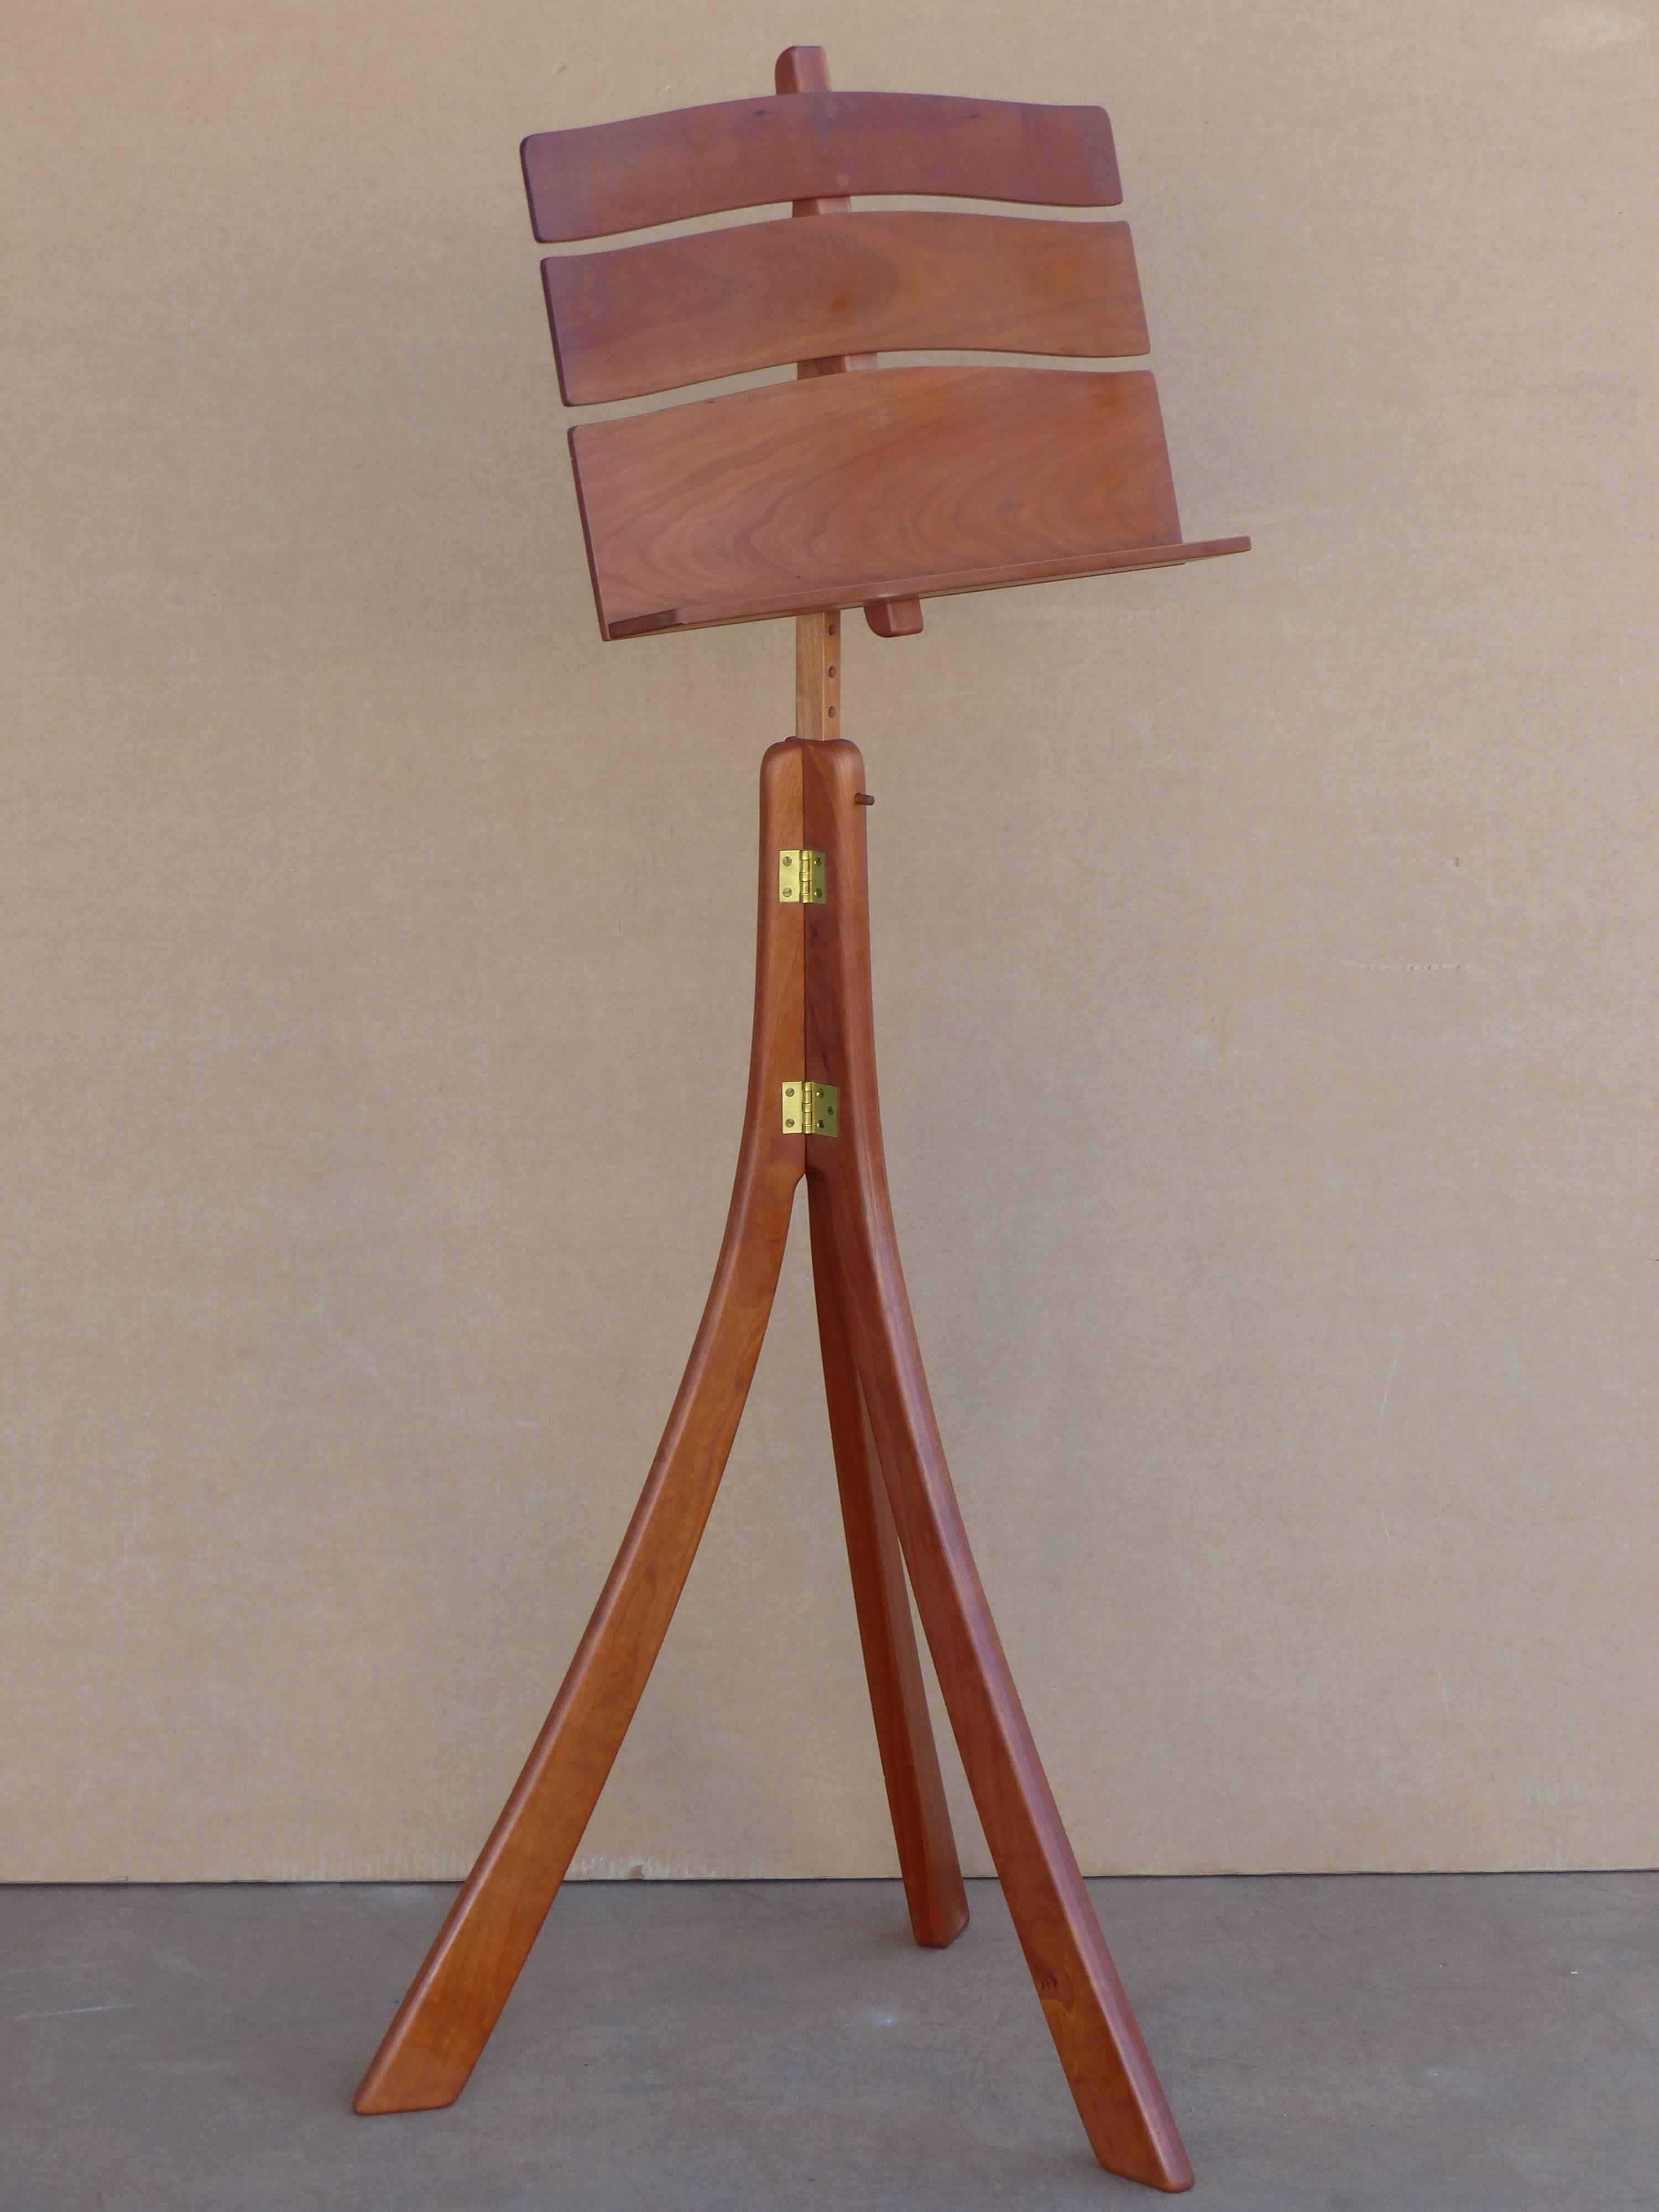 Adjustable walnut music stand with folding tripod base and removable top for easy transport. 40.25